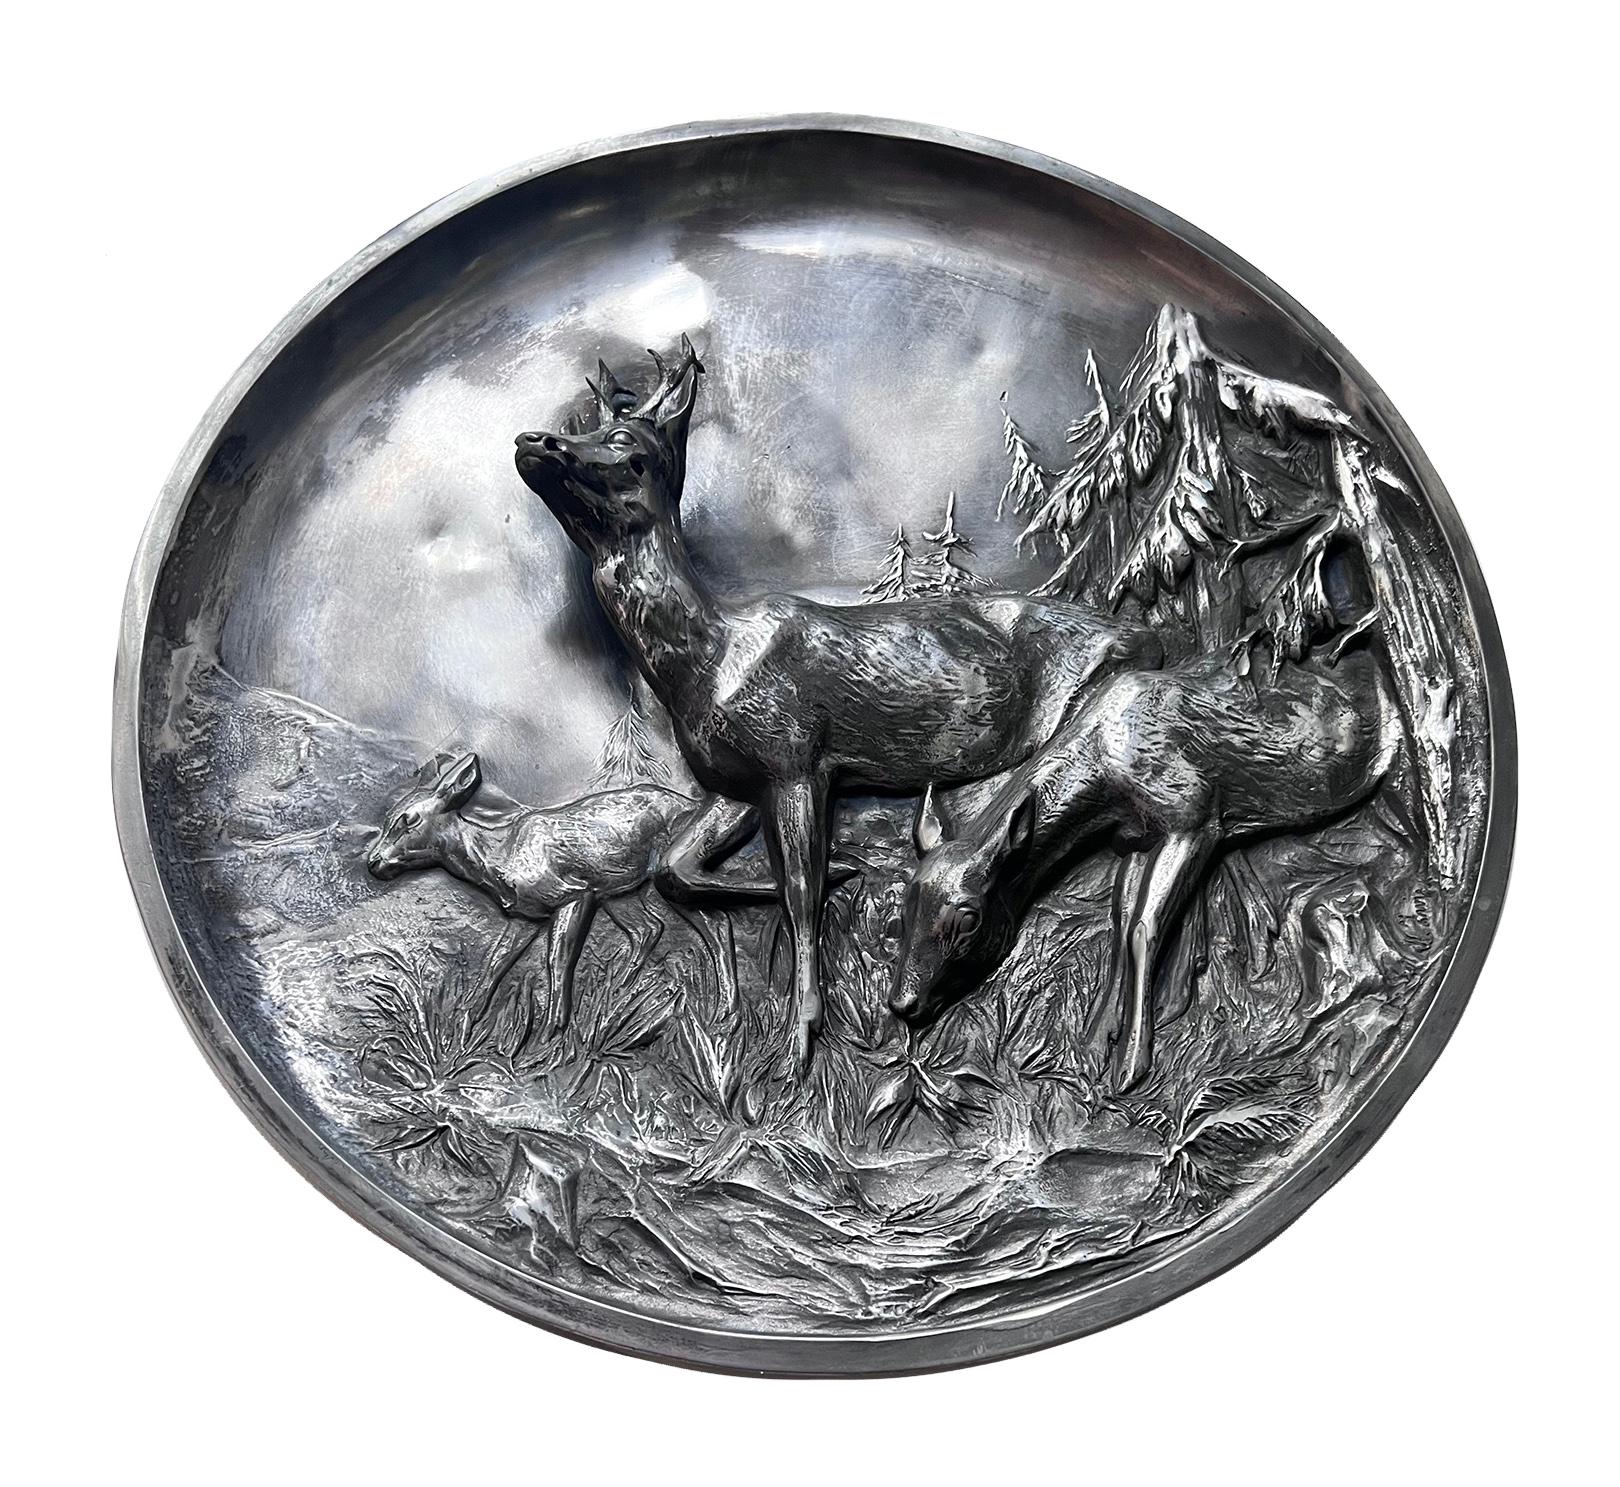 A pair of circa 1900s English silver plated wall plaques depicting deer.

Measurements:
Diameter 18